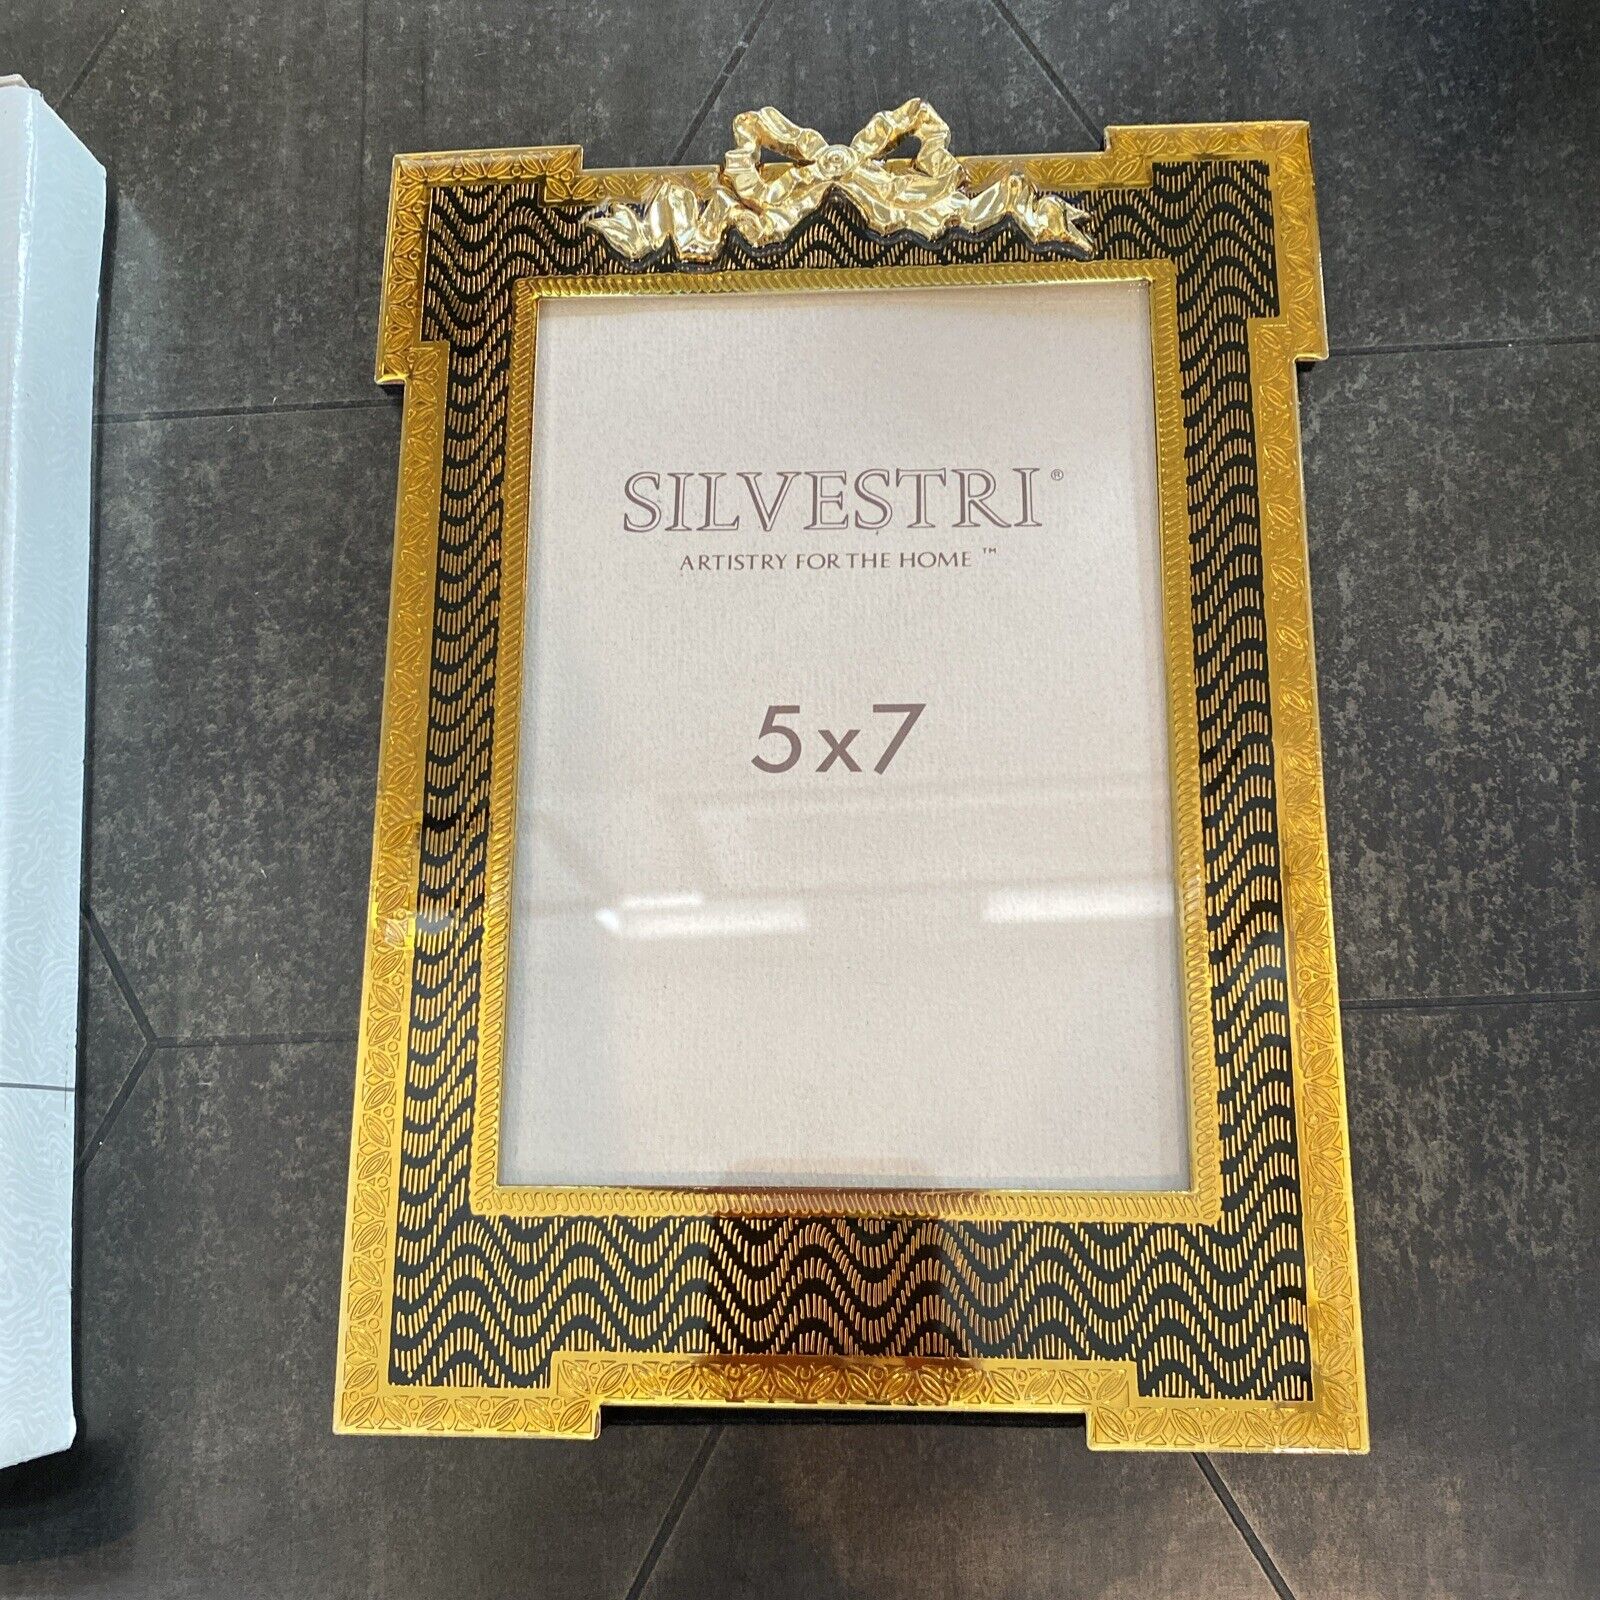 VTG SILVESTRI  5 x 7 photo frame Gold And Bow. 1990. Box Included